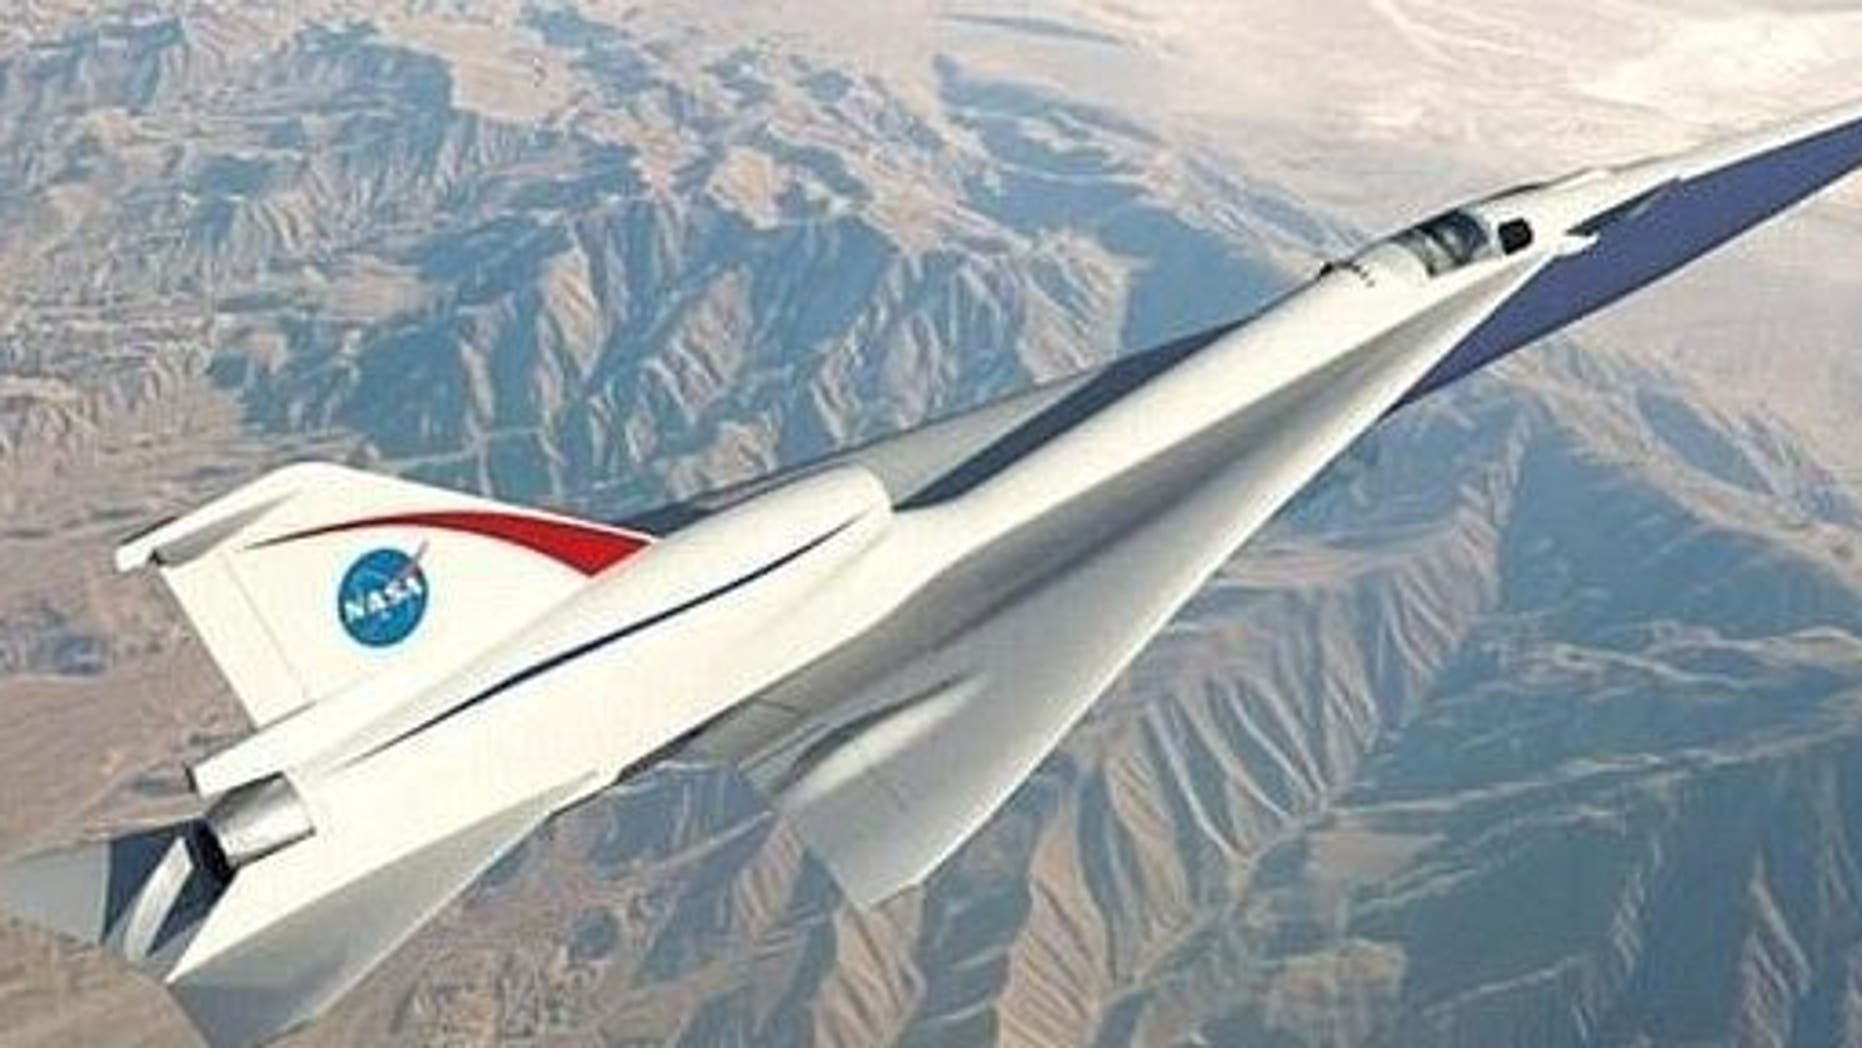 The X-59 could one day fly from London to New York in just three hours